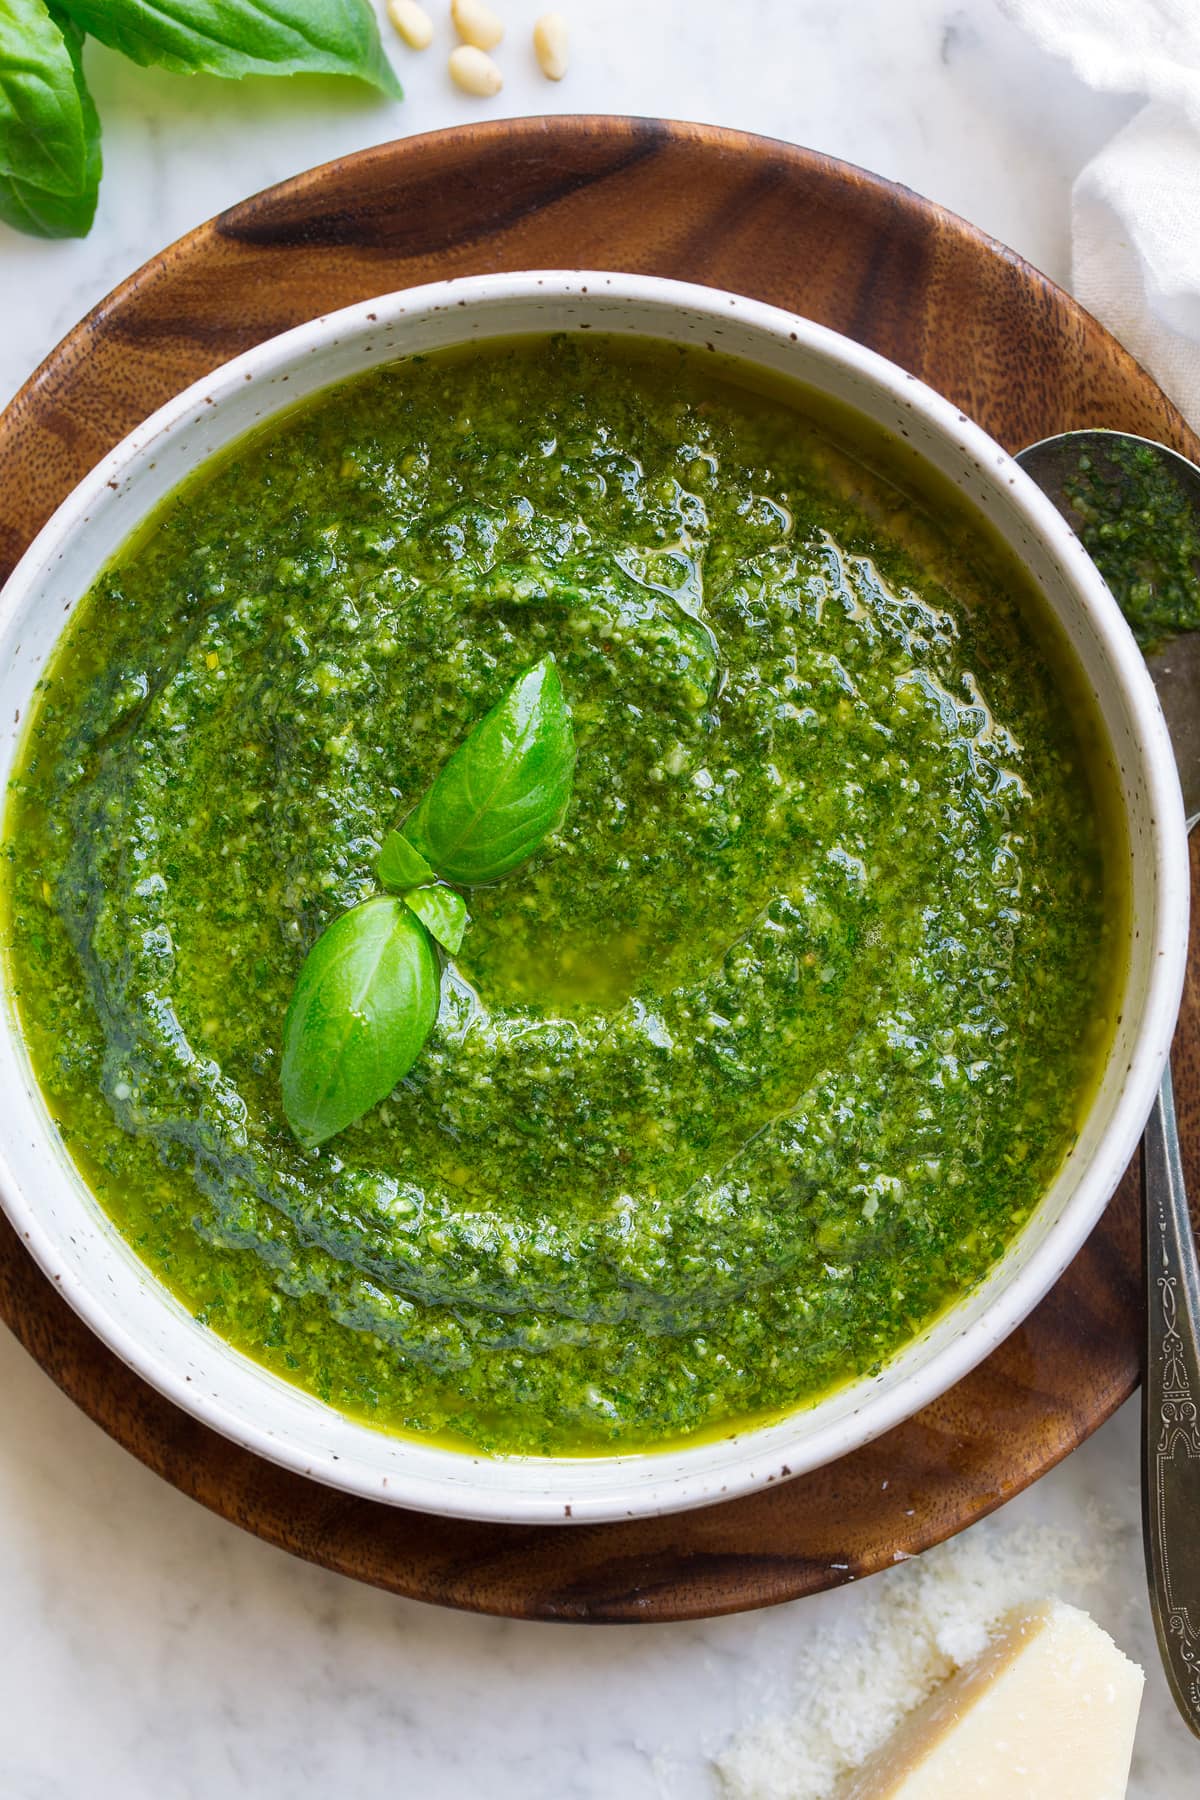 Image shown overhead of pesto in a white bowl resting on a wooden platter.